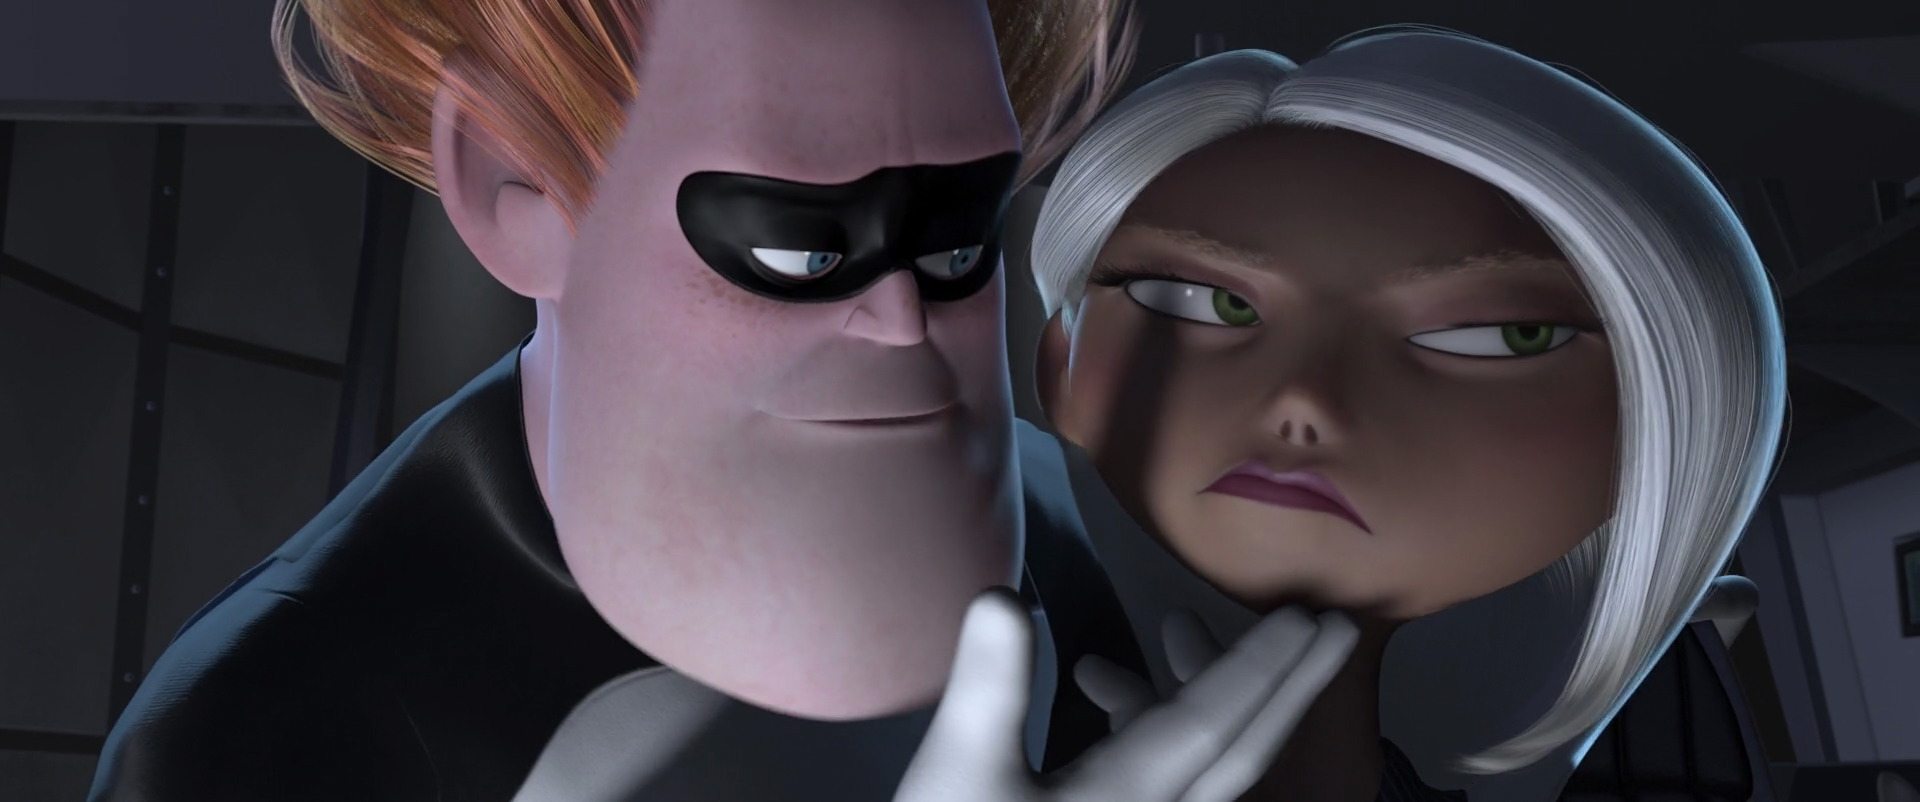 Snarcasm: Syndrome is Mr. Incredible's Secret Lovechild - Jon Negroni